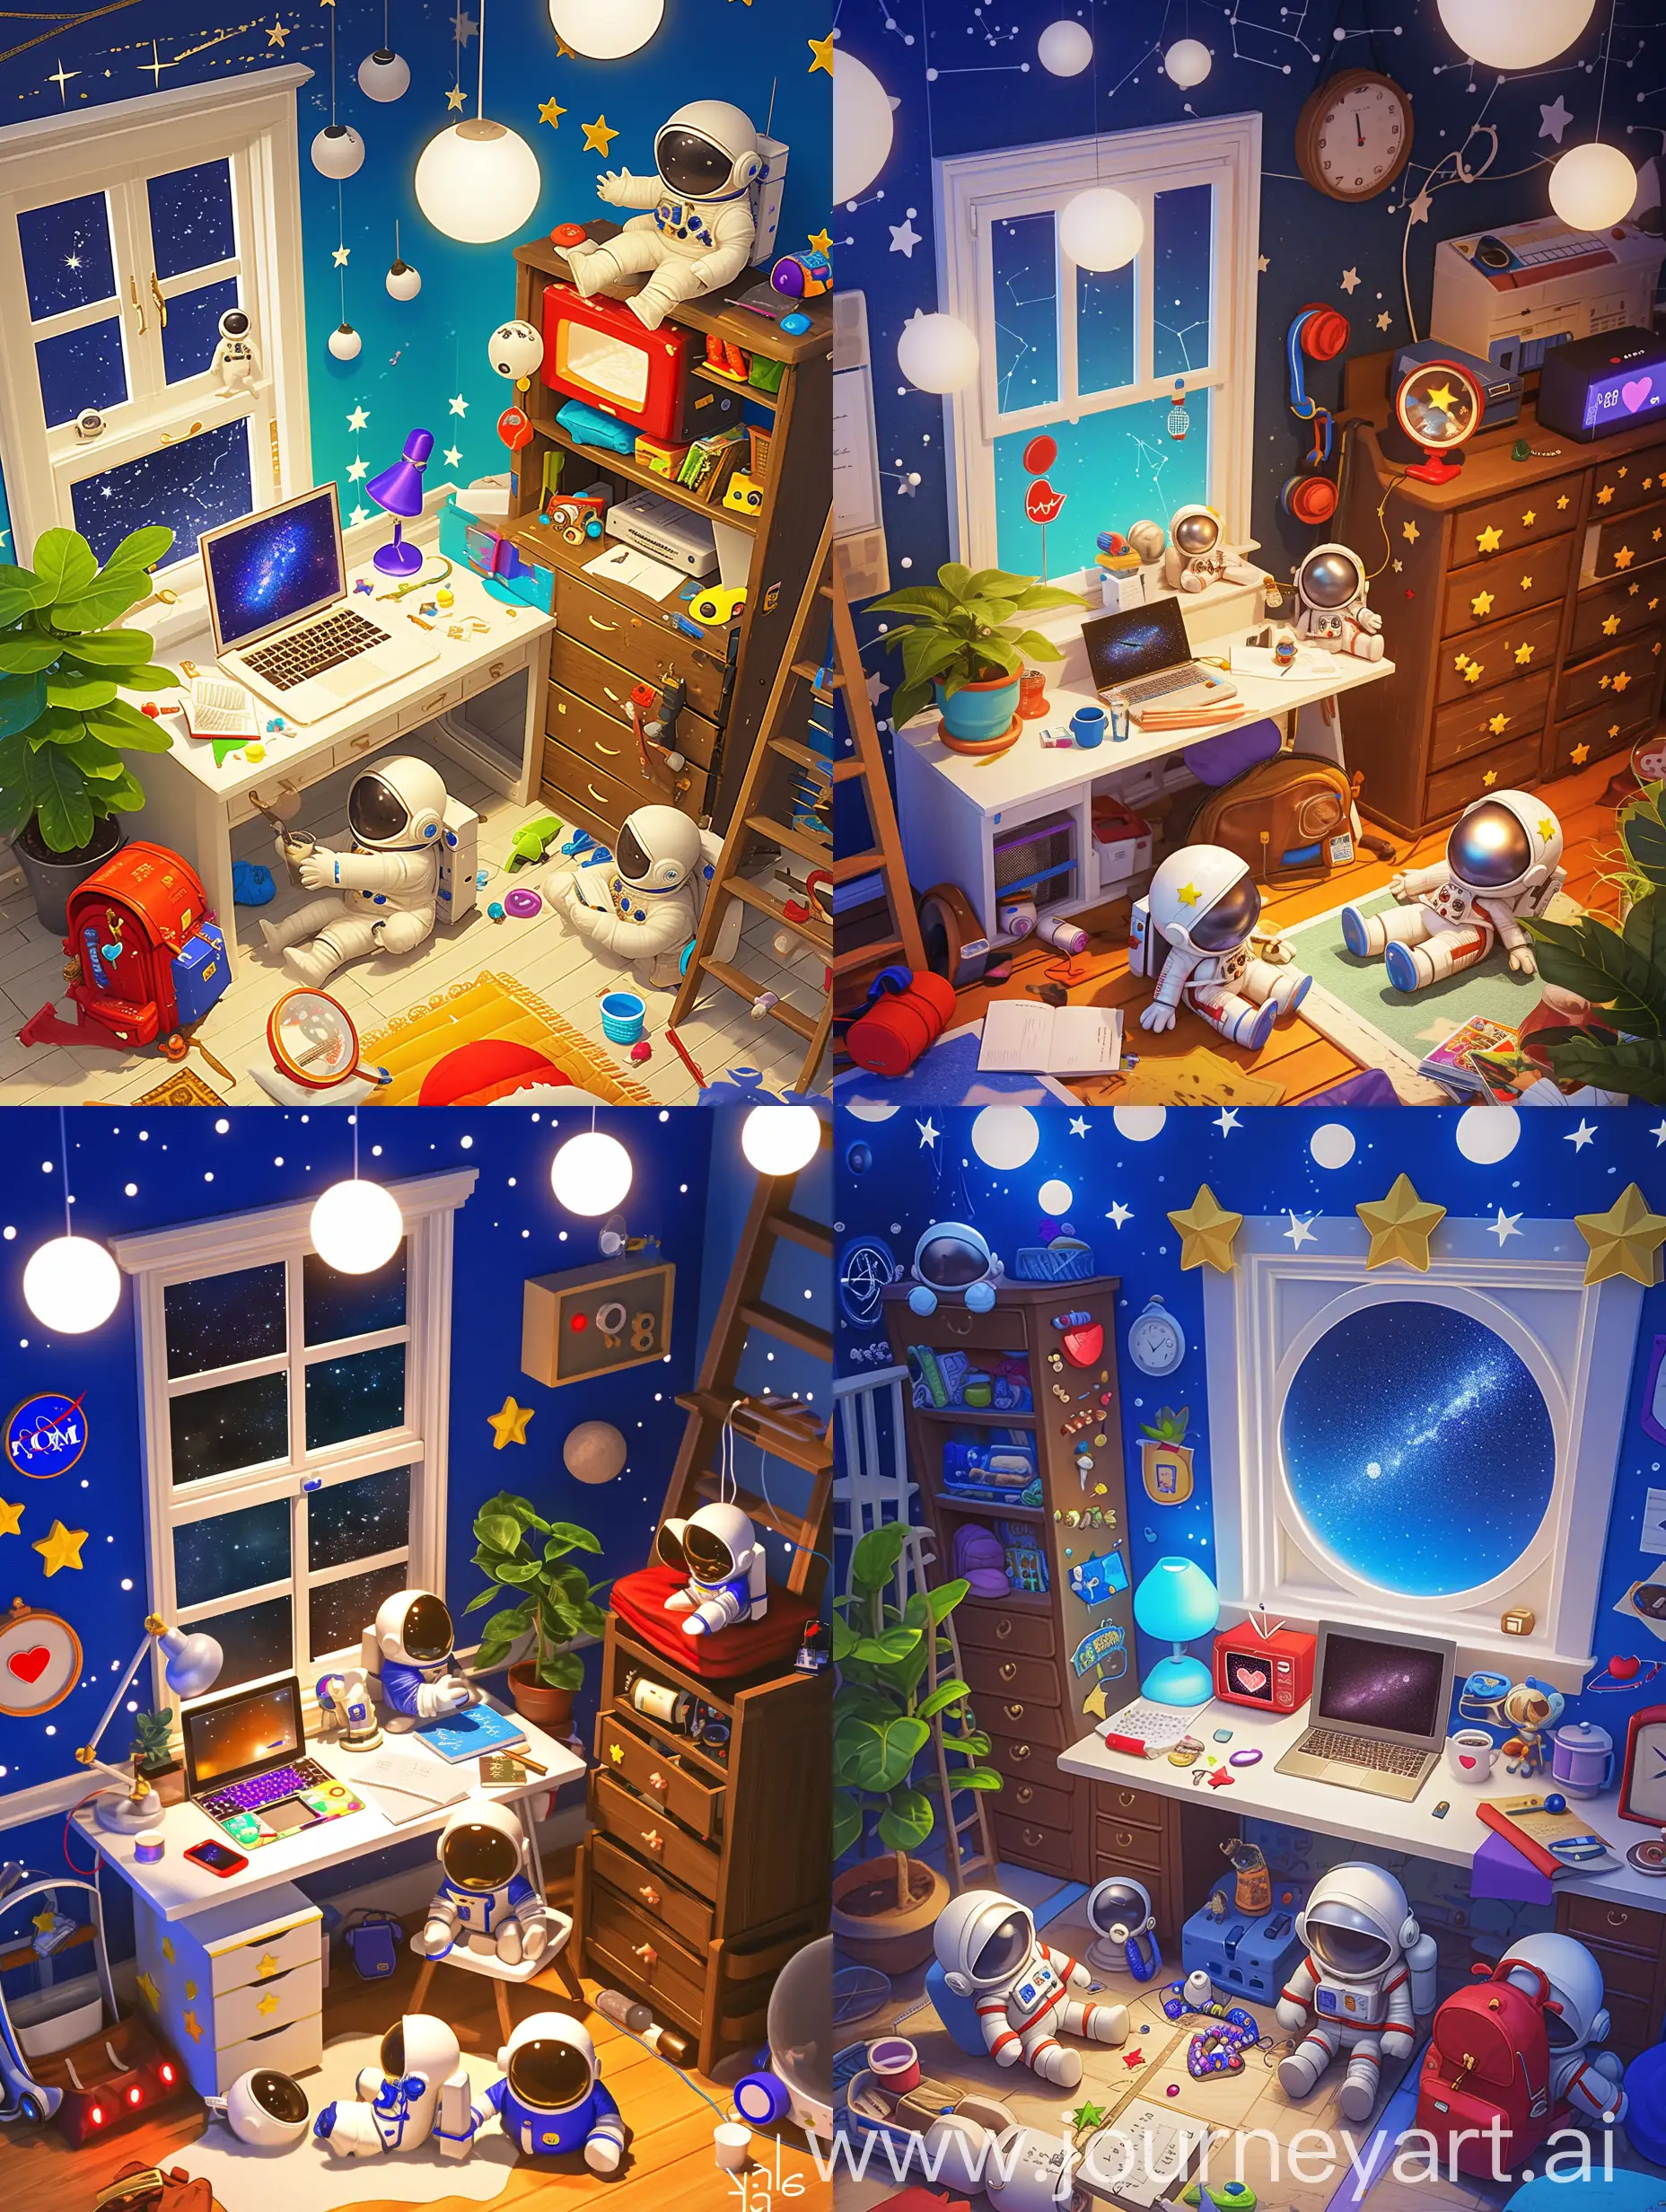 Whimsical-AstronautThemed-Cozy-Room-with-Playful-Details